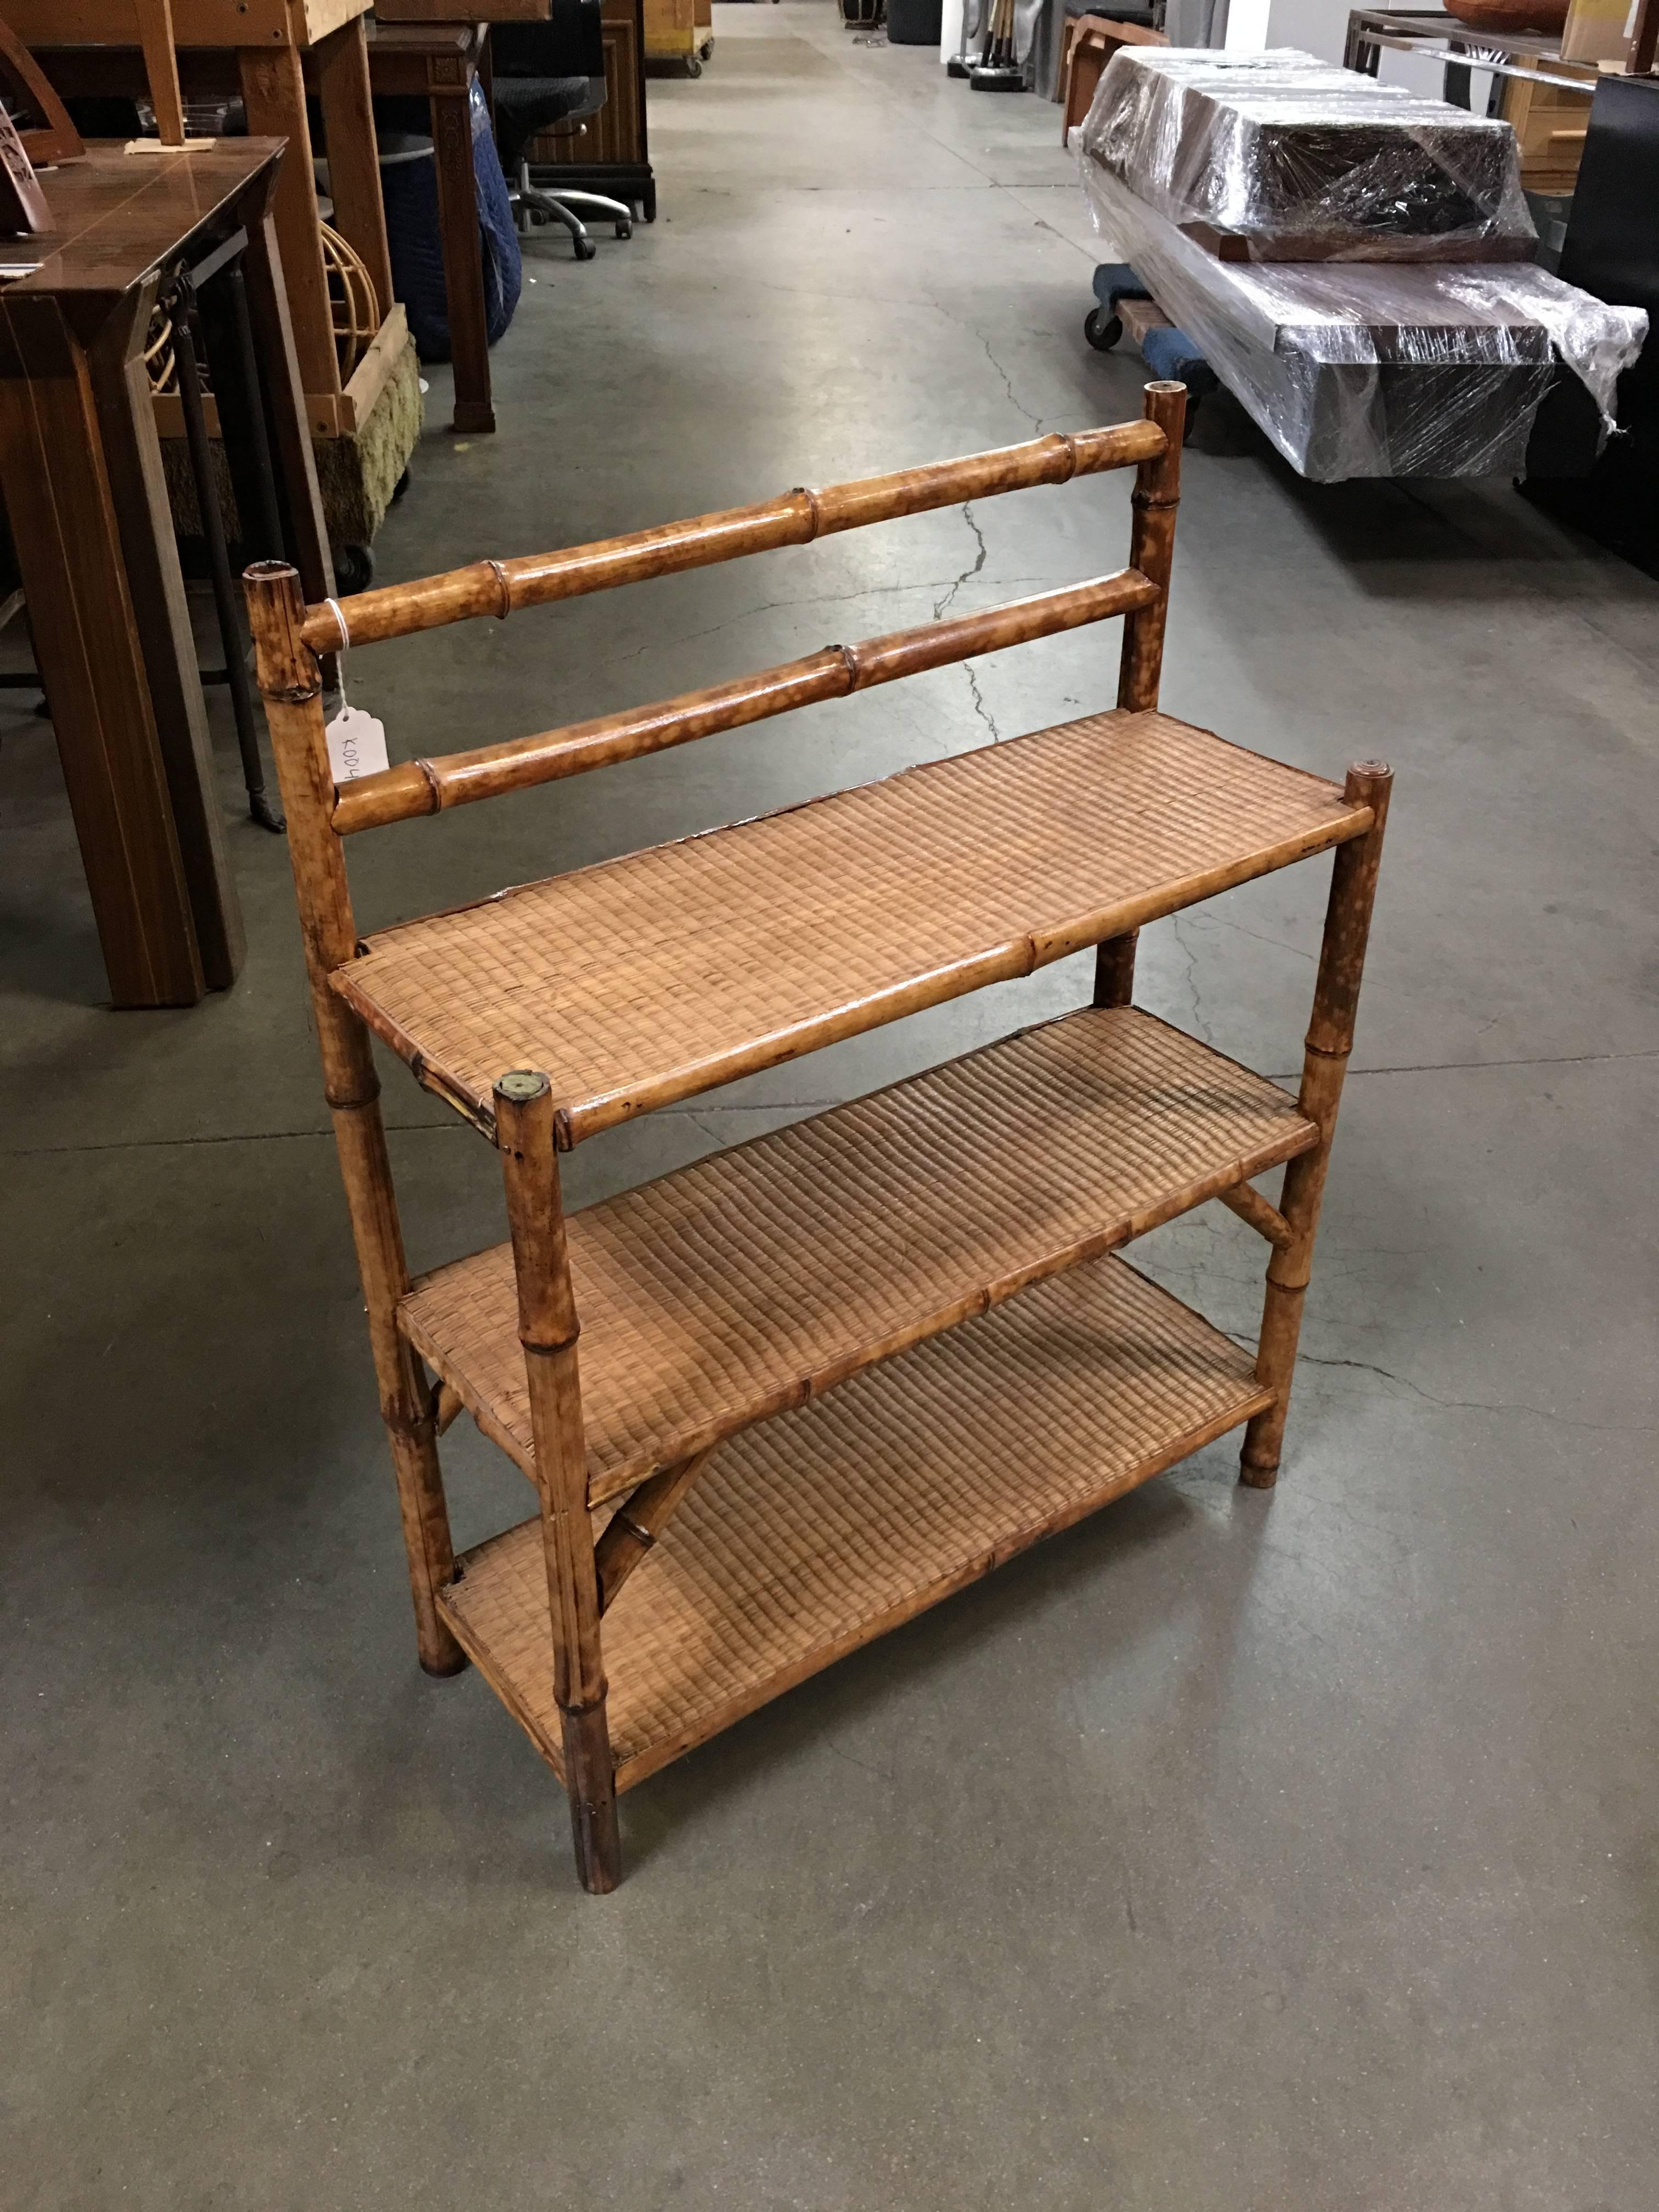 Antique three-tier tiger bamboo shelf which also works as a table top rack with rice mat top.

Refinished to new for you.

All rattan, bamboo and wicker furniture has been painstakingly refurbished to the highest standards with the best materials.